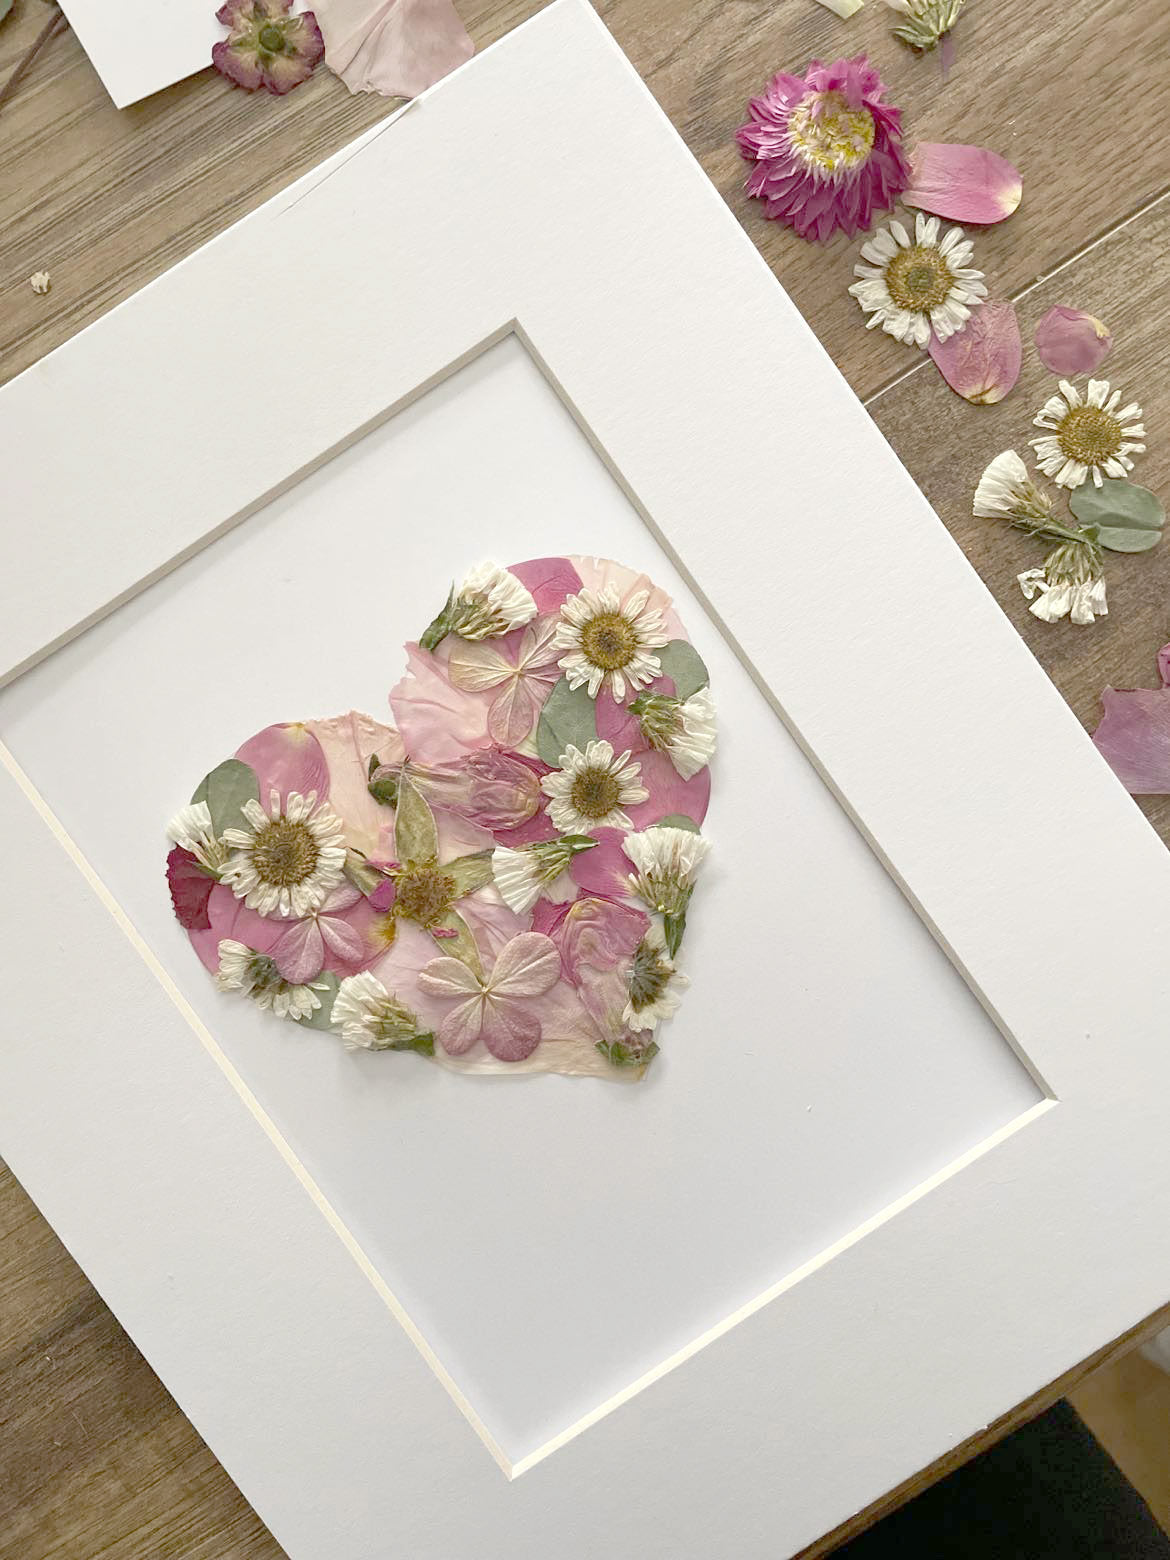 Pink Floral Heart, Pressed Flower Artwork - Small